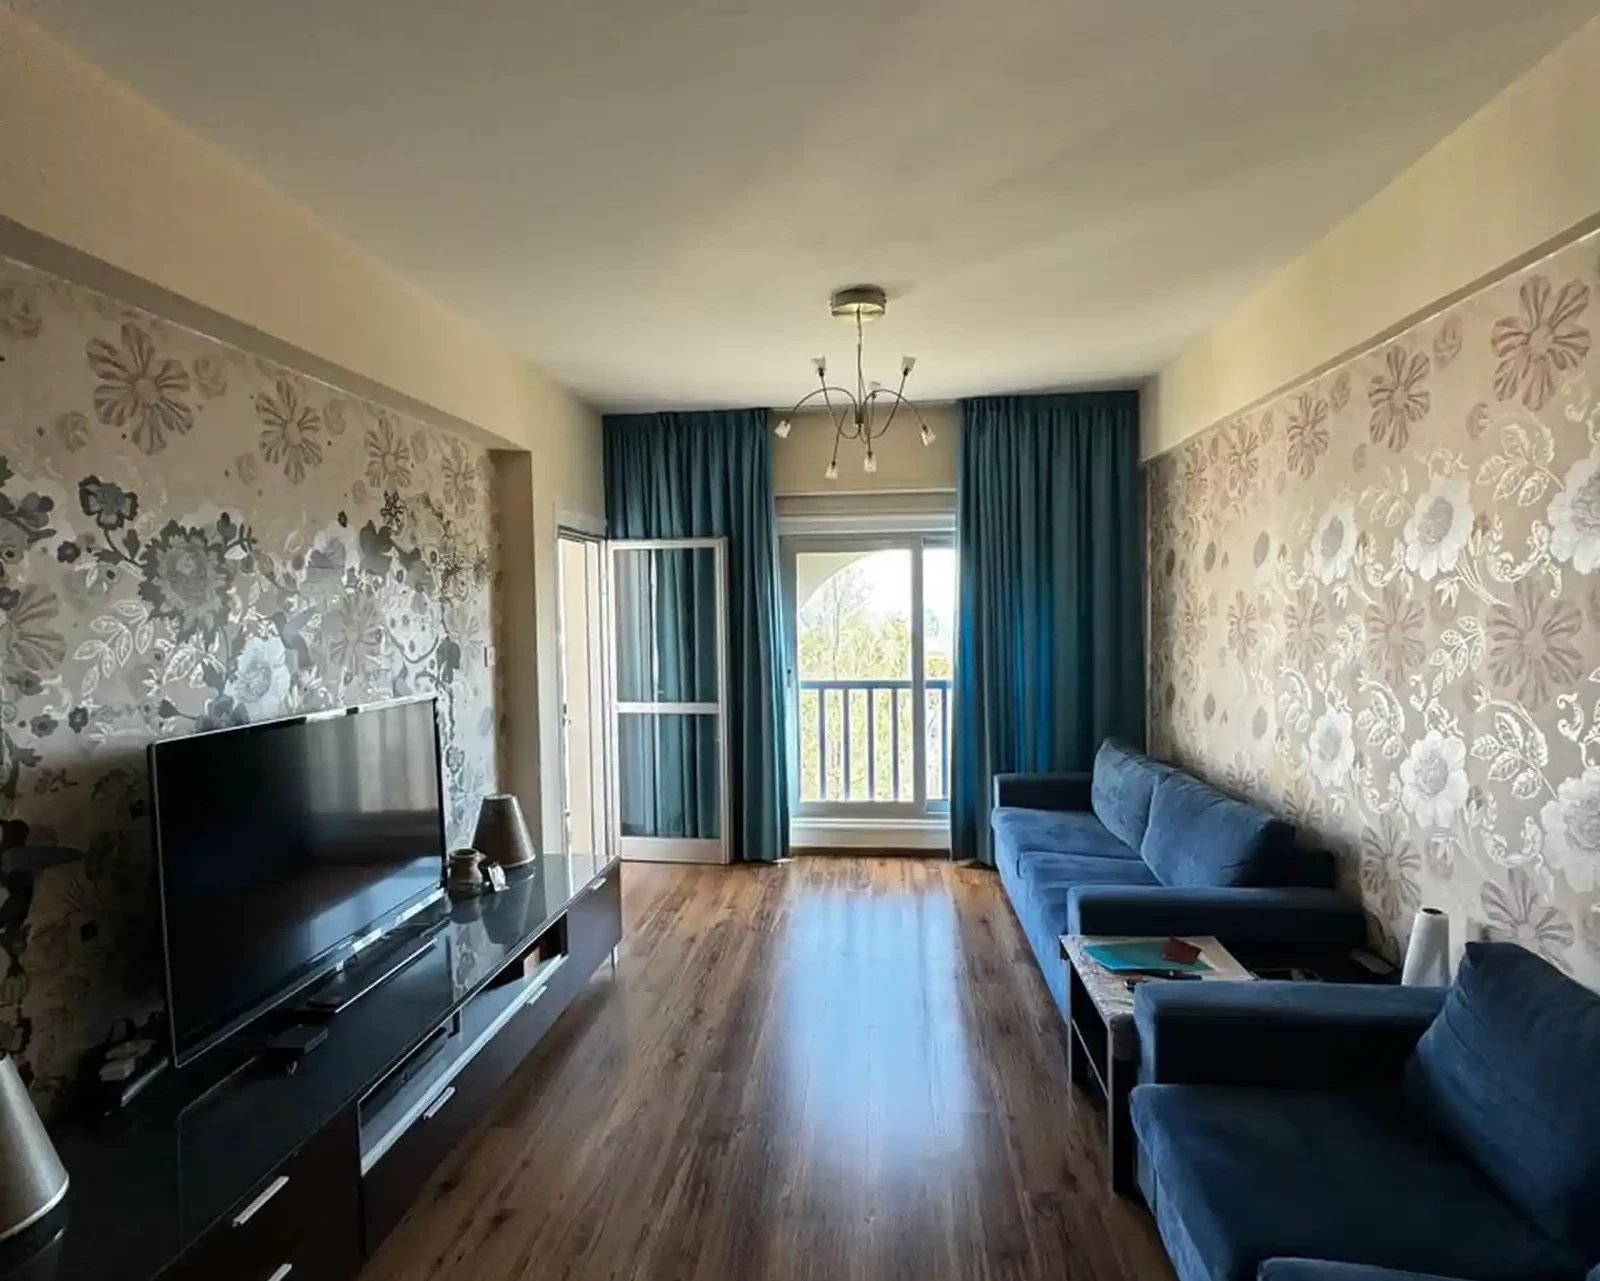 3-bedroom apartment fоr sаle €330.000, image 1